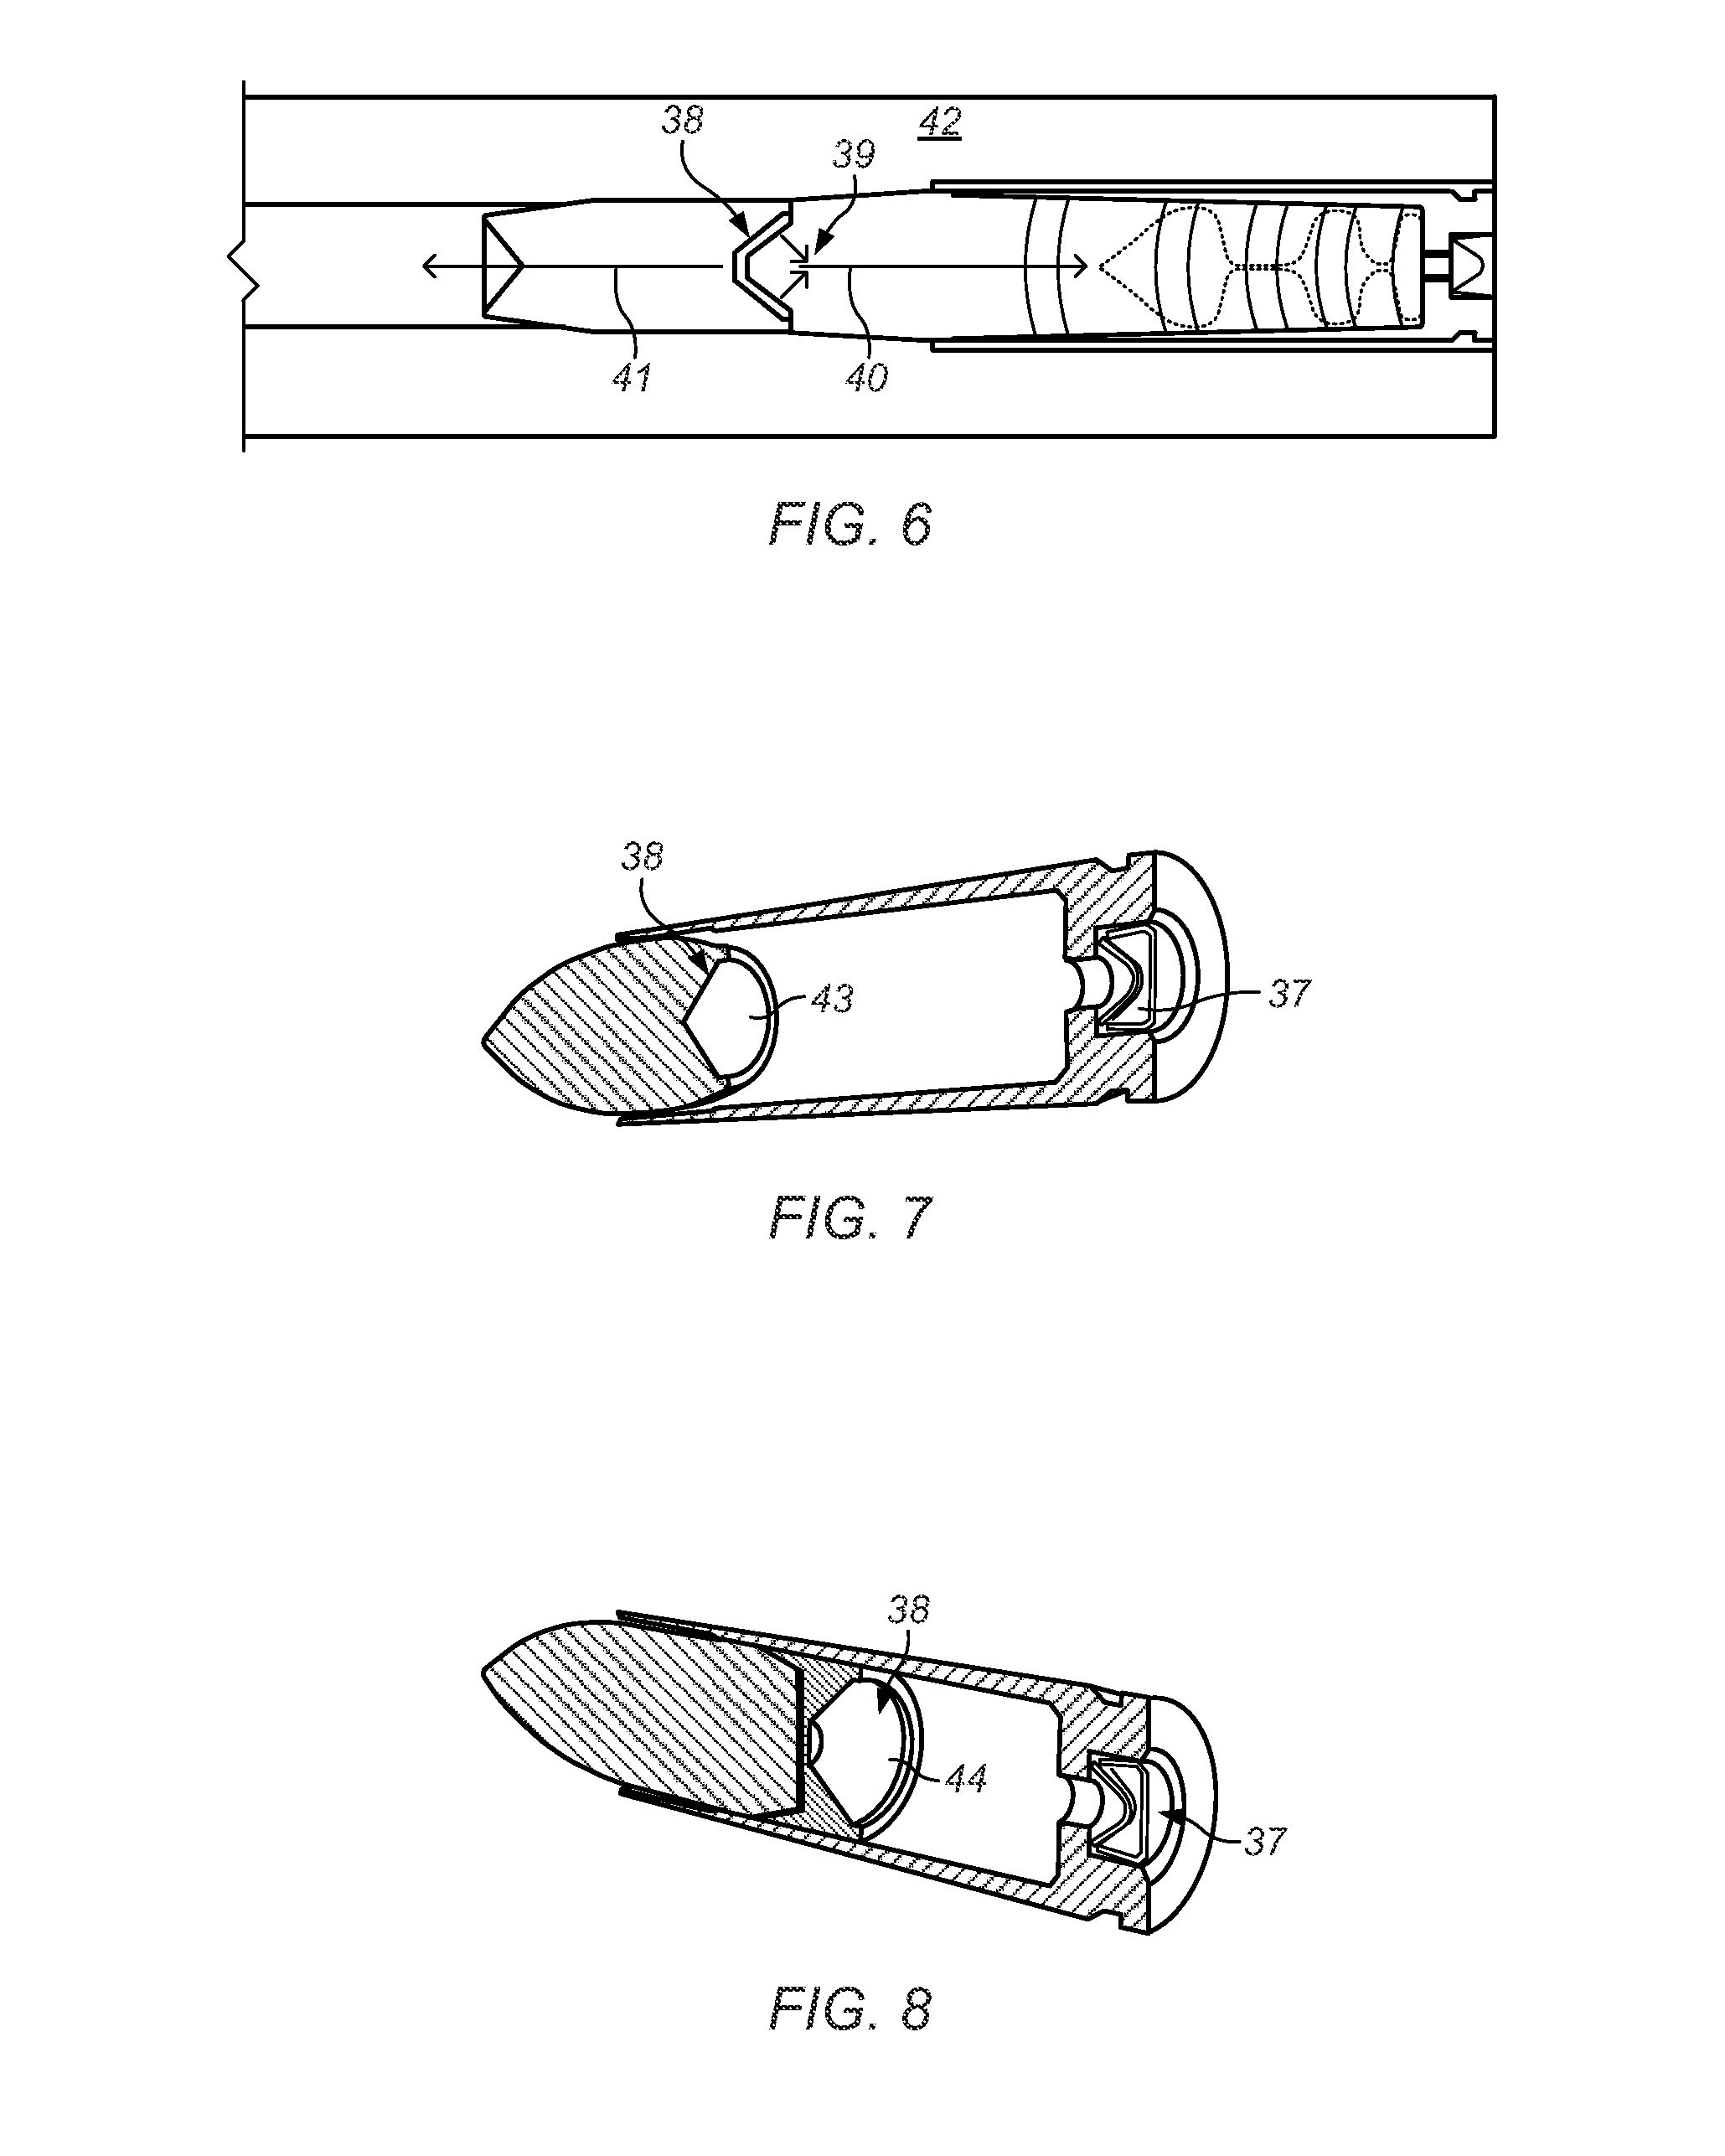 Cartridge with rapidly increasing sequential ignitions for guns and ordnances